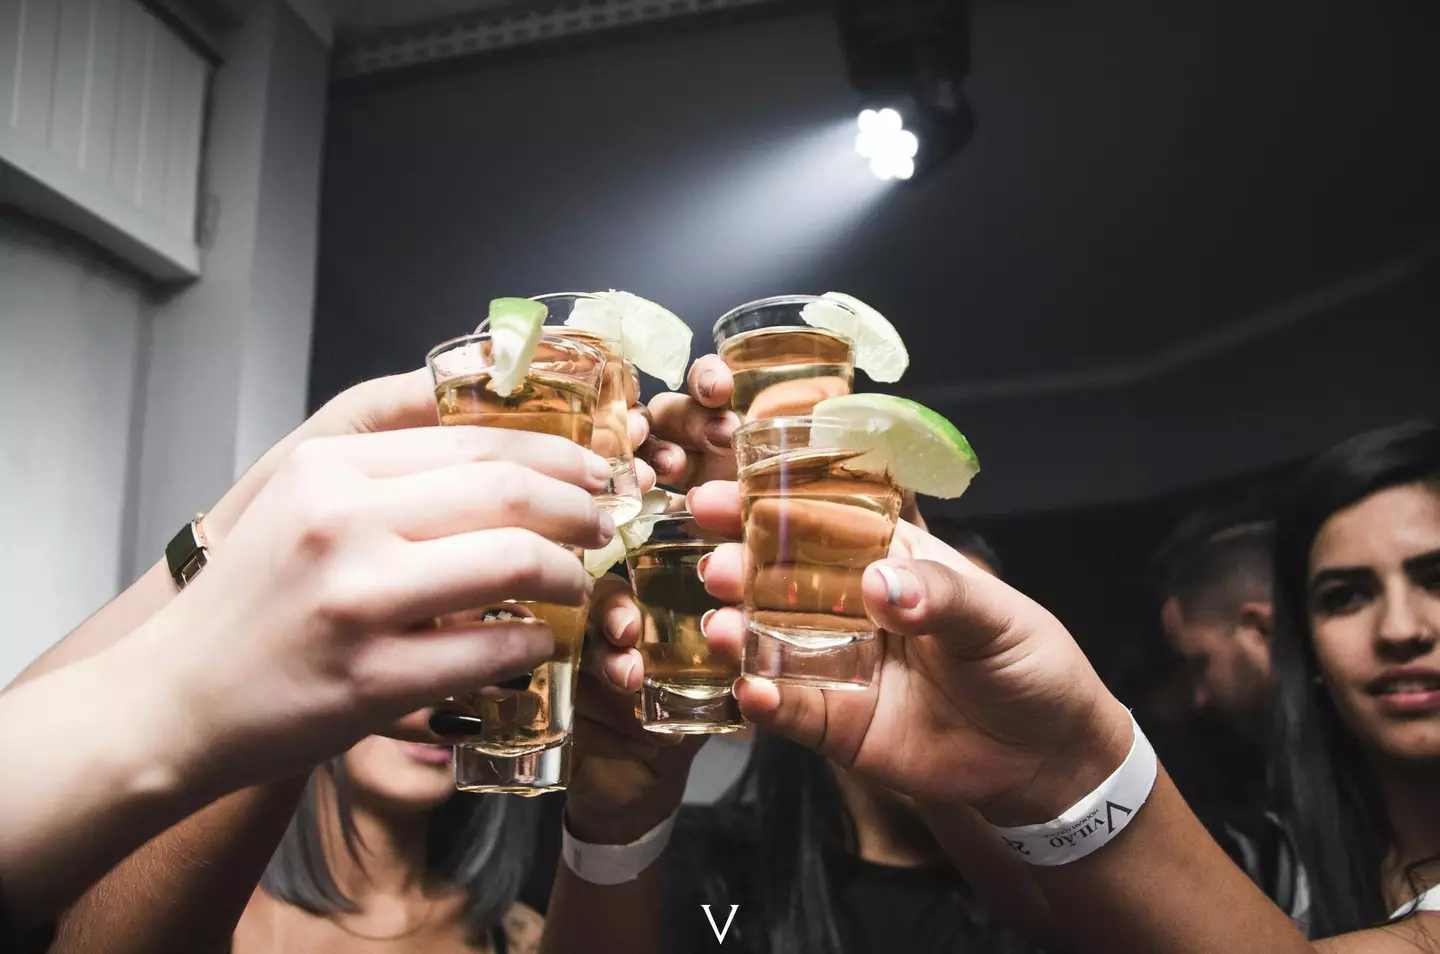 Binge drinking is bad news for your body.